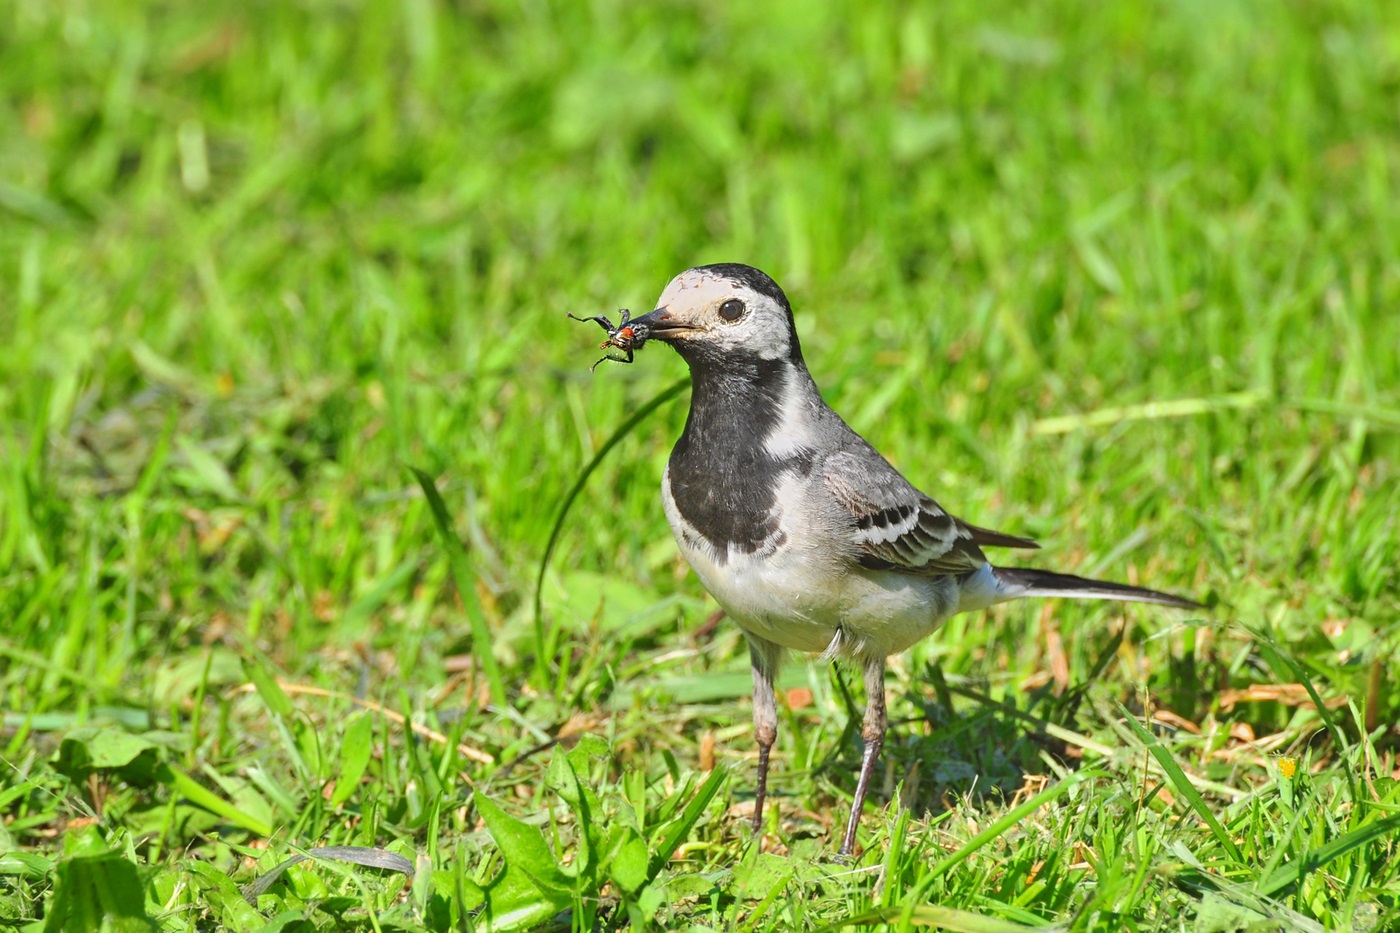 White Wagtail caught a fly